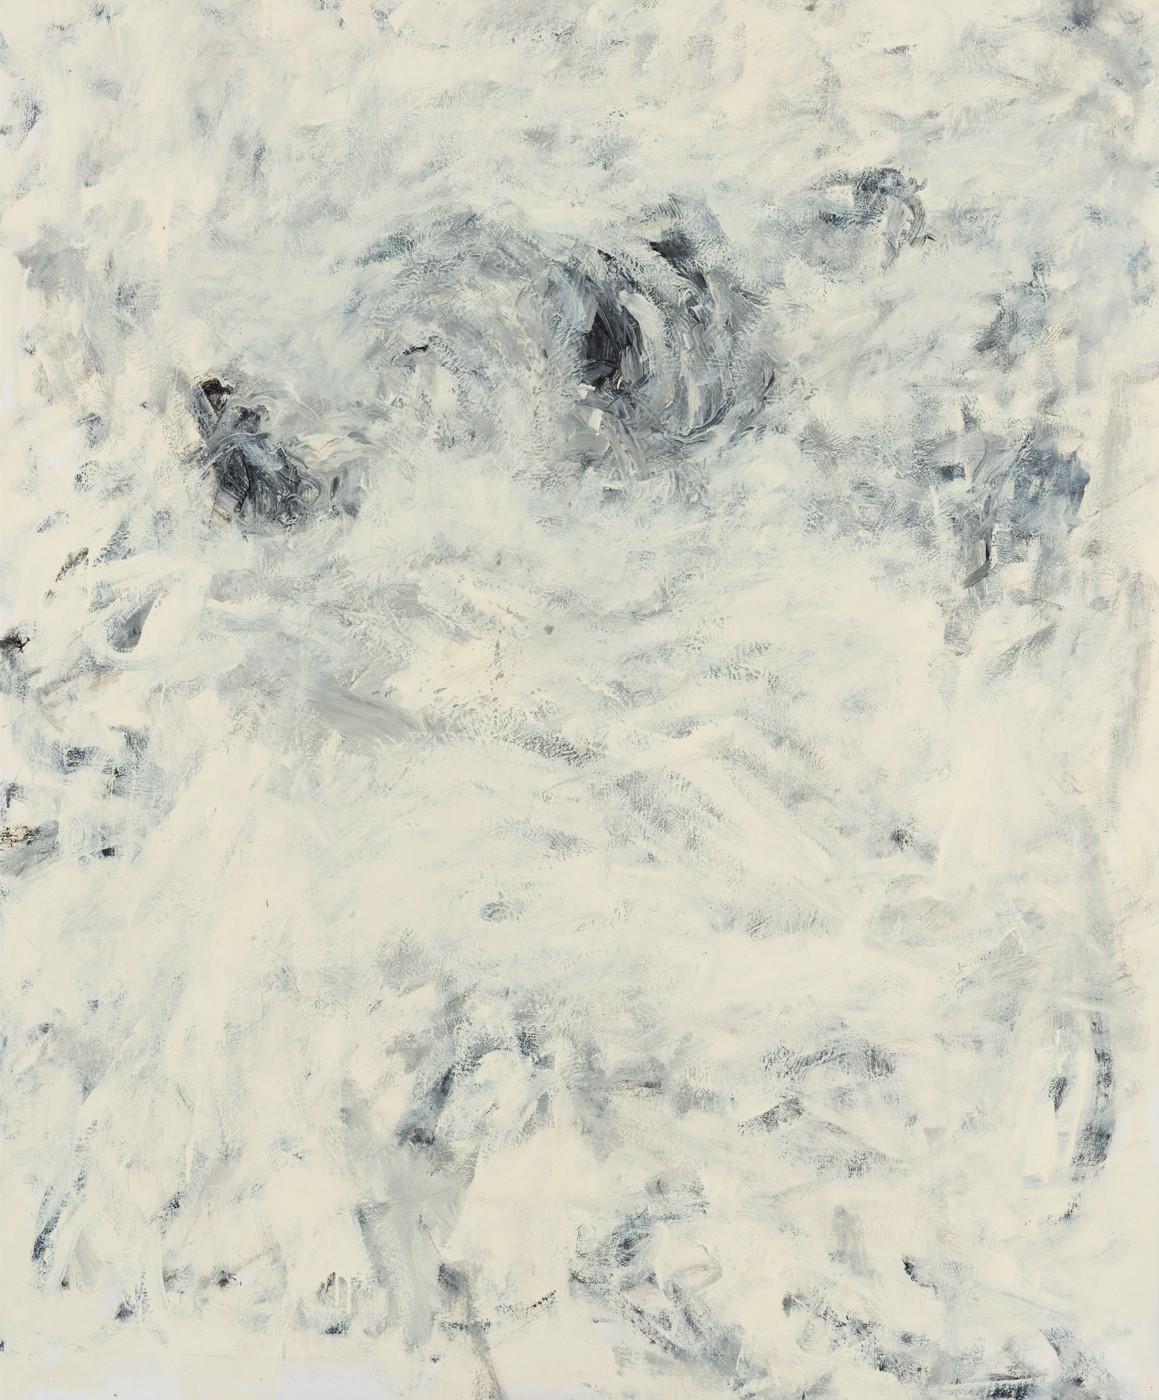 Untitled 013 [Remains of the Remains 013], 2019
oil on canvas
78 47/64 H x 57 3/32 W in
200 H x 145 W cm

The large-sized paintings, signed by Zsolt Berszán, address the subject of death in terms of the remains of decaying bodies. The surface of the